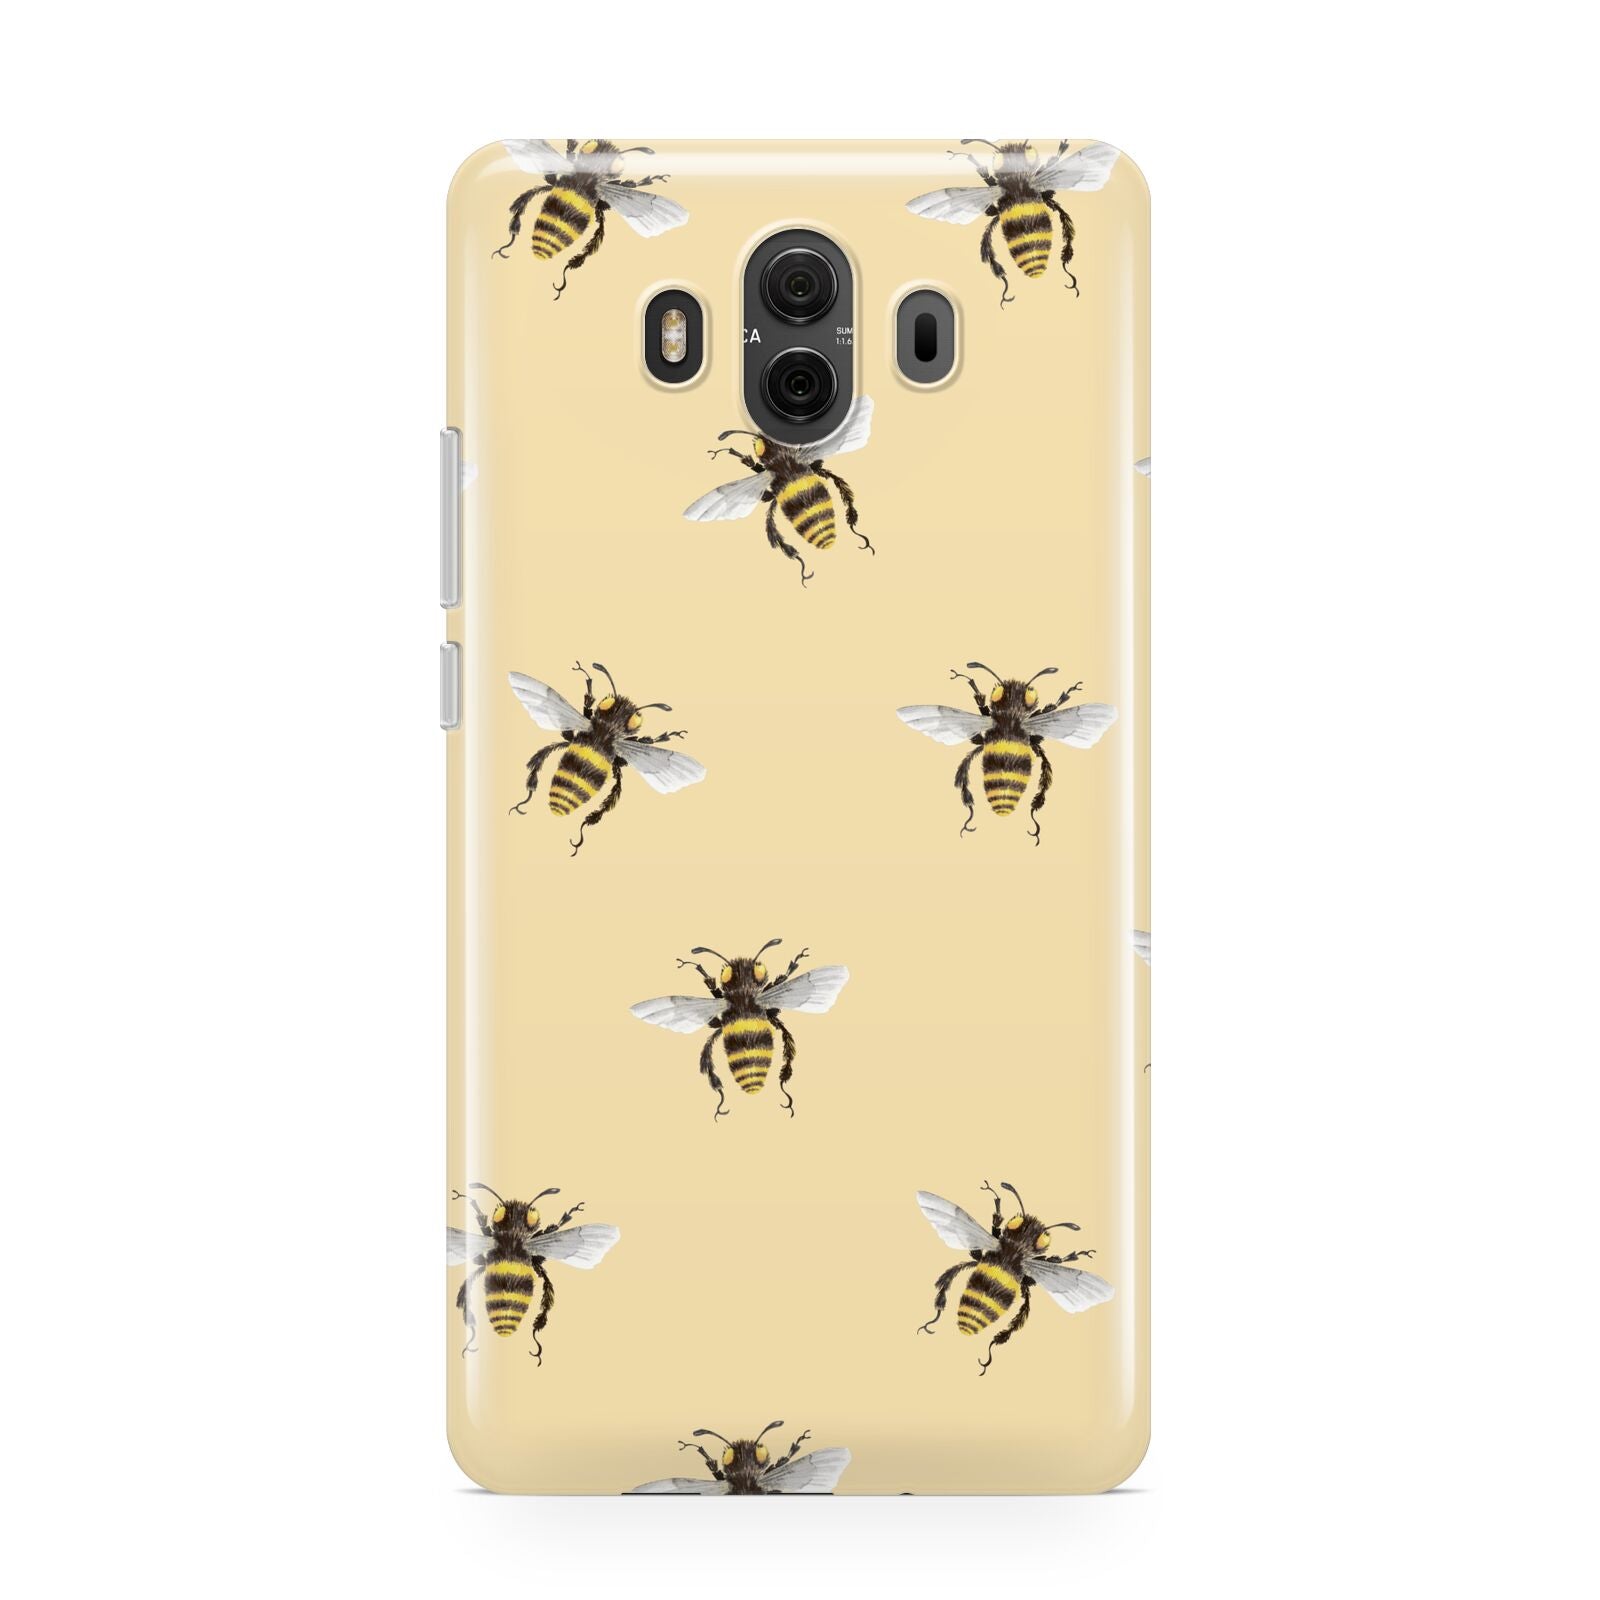 Bee Illustrations Huawei Mate 10 Protective Phone Case